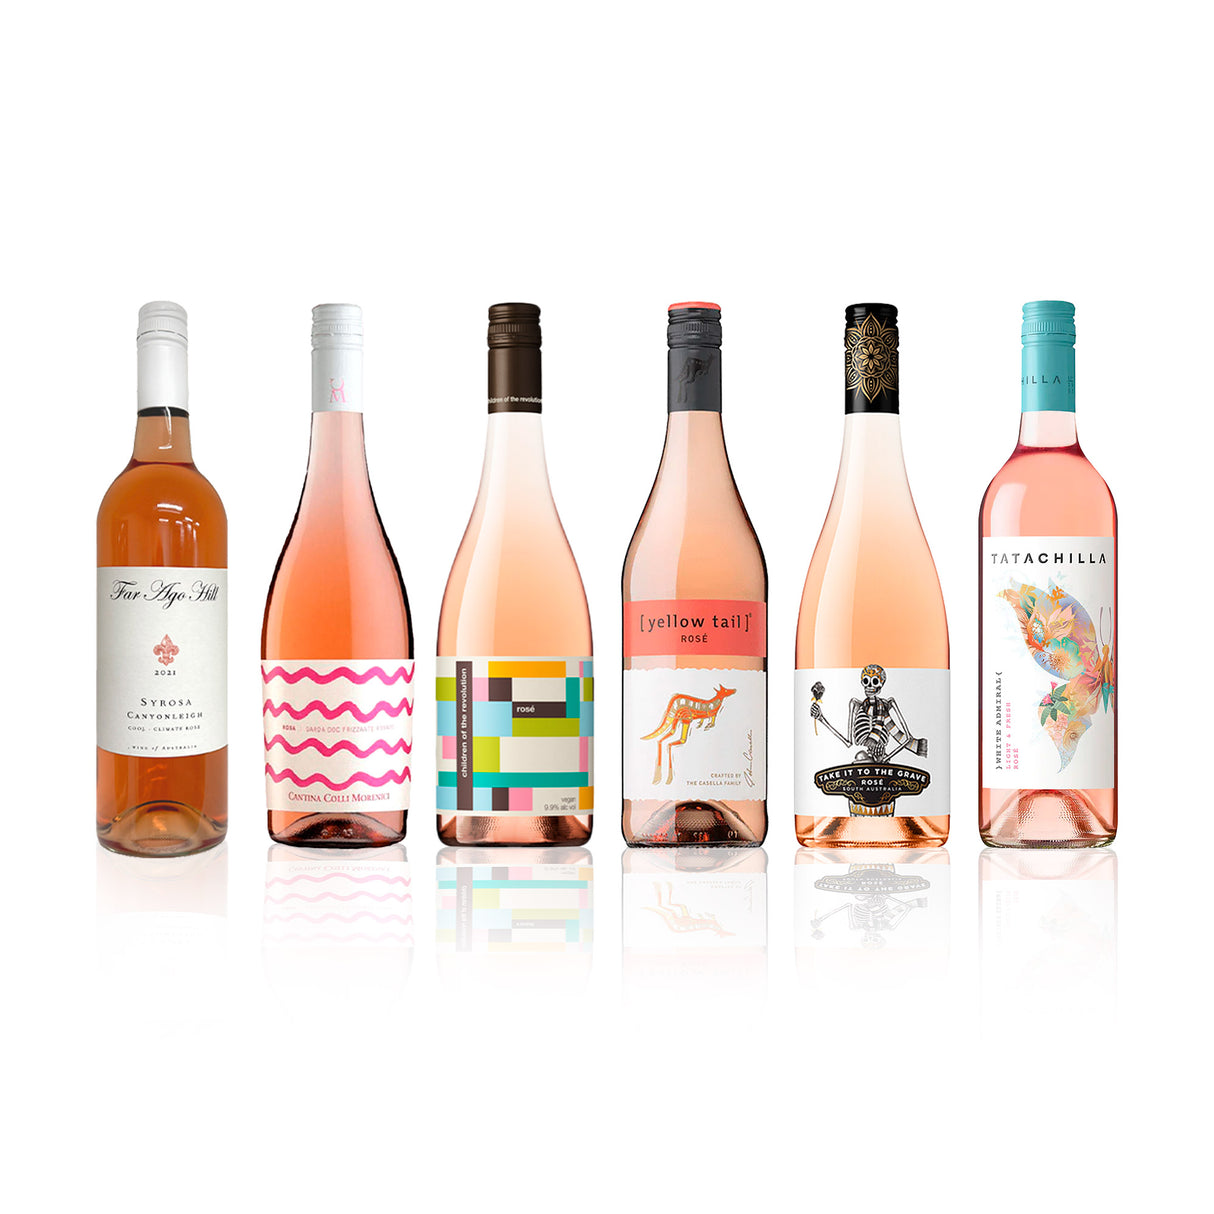 All The Way Rose Mix 1.0 (6 Bottles)